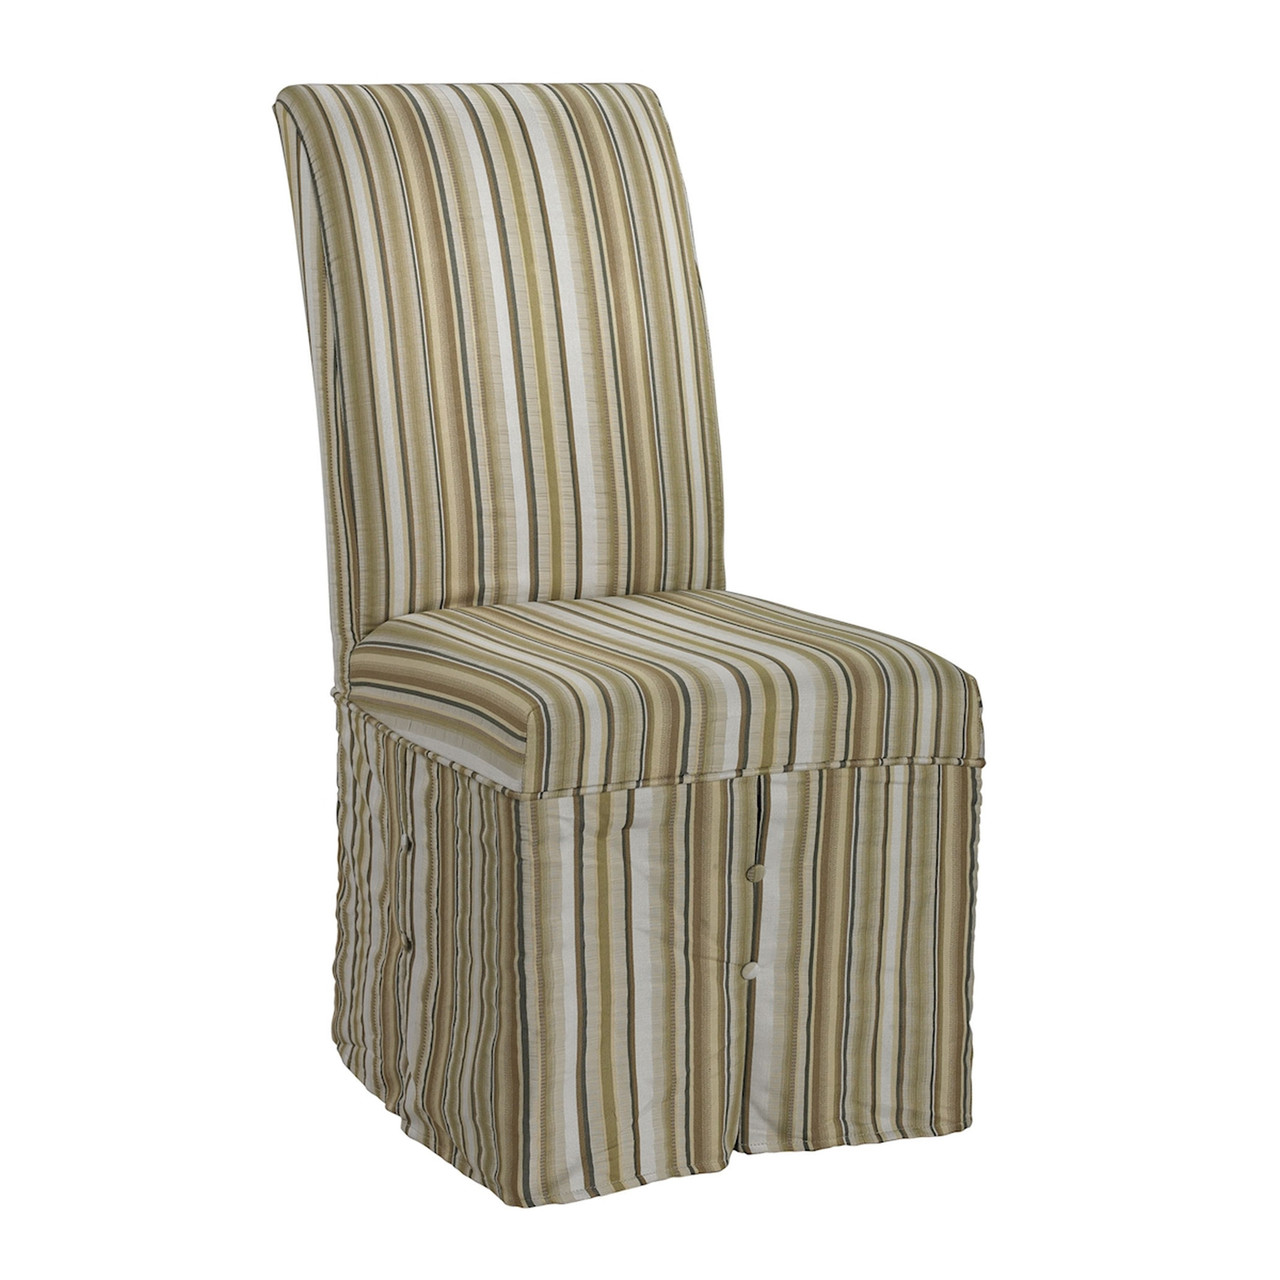 ELK HOME 6086396 Jolipa - Birch Parsons Skirted Chair - COVER ONLY